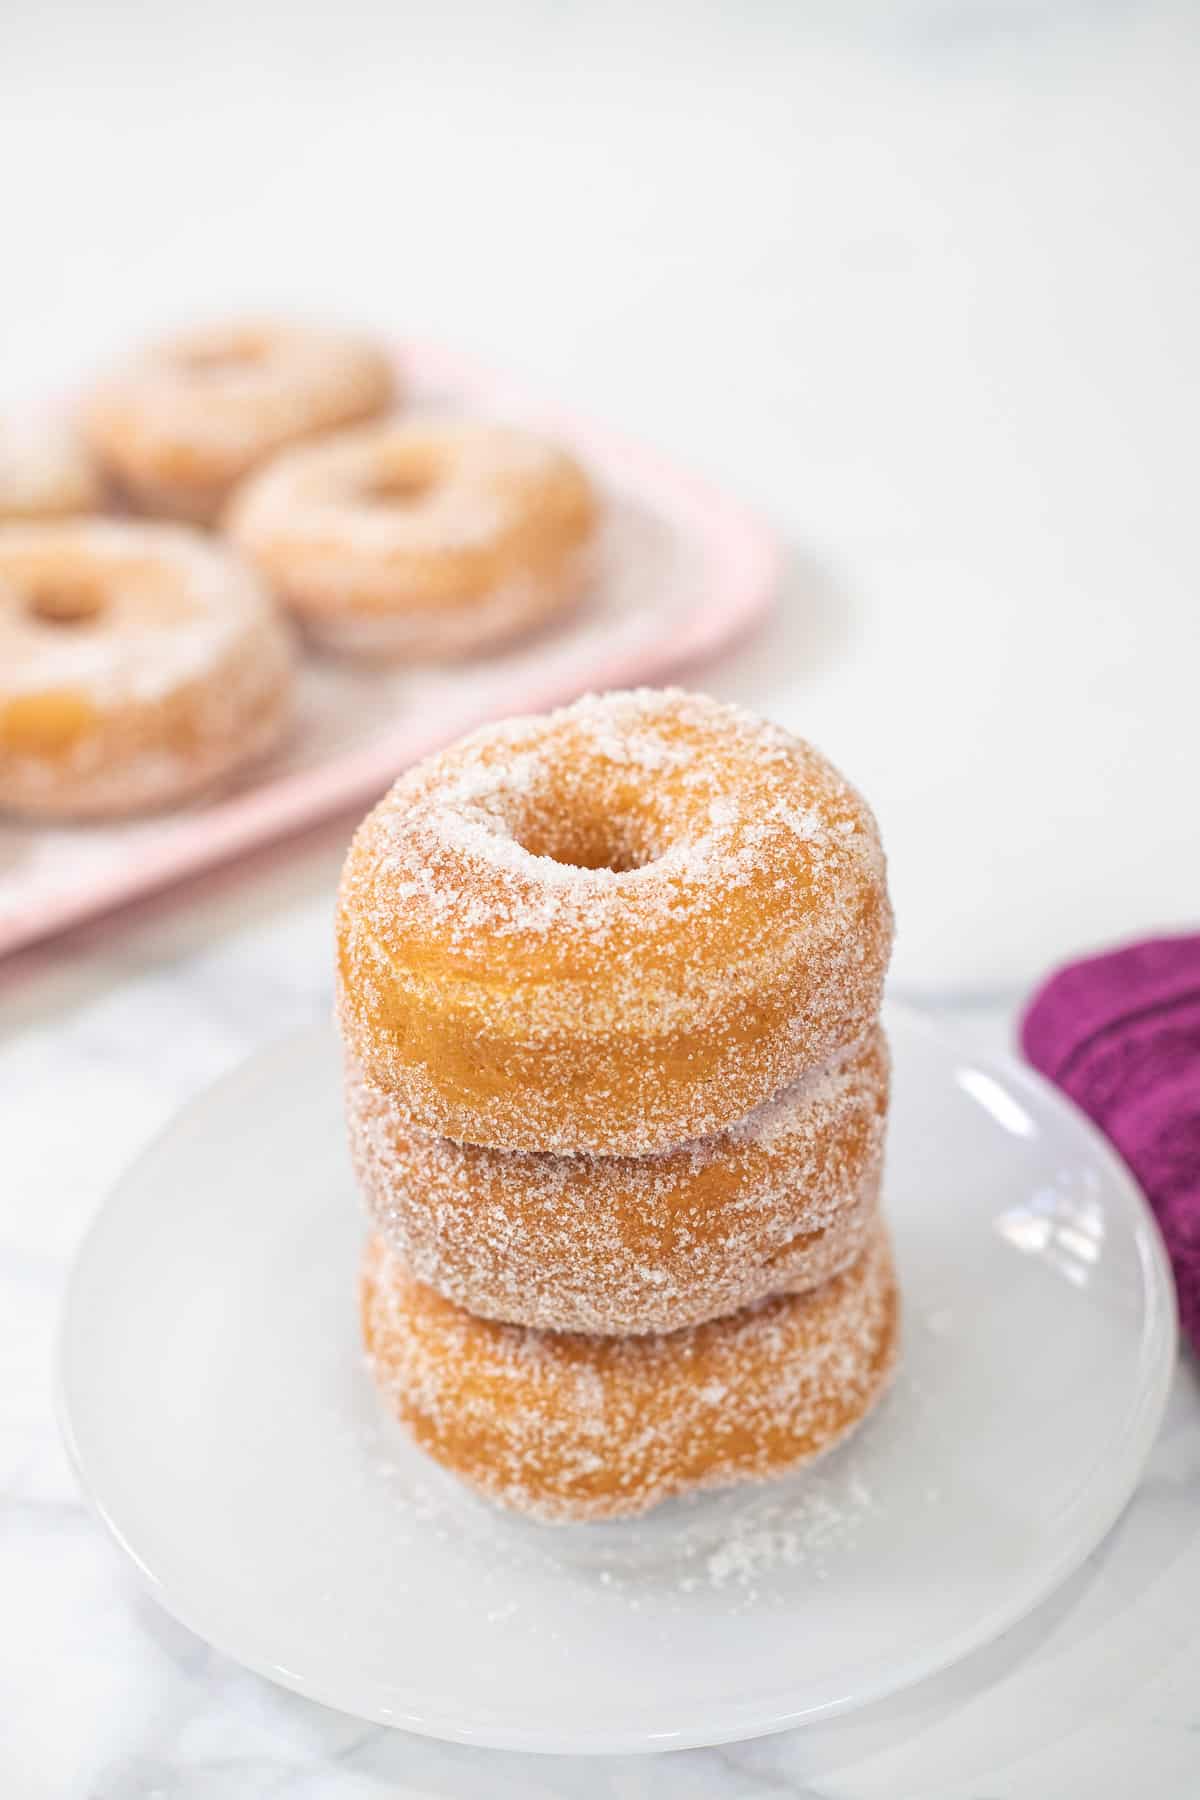 A stack of 3 doughnuts on a white plate.